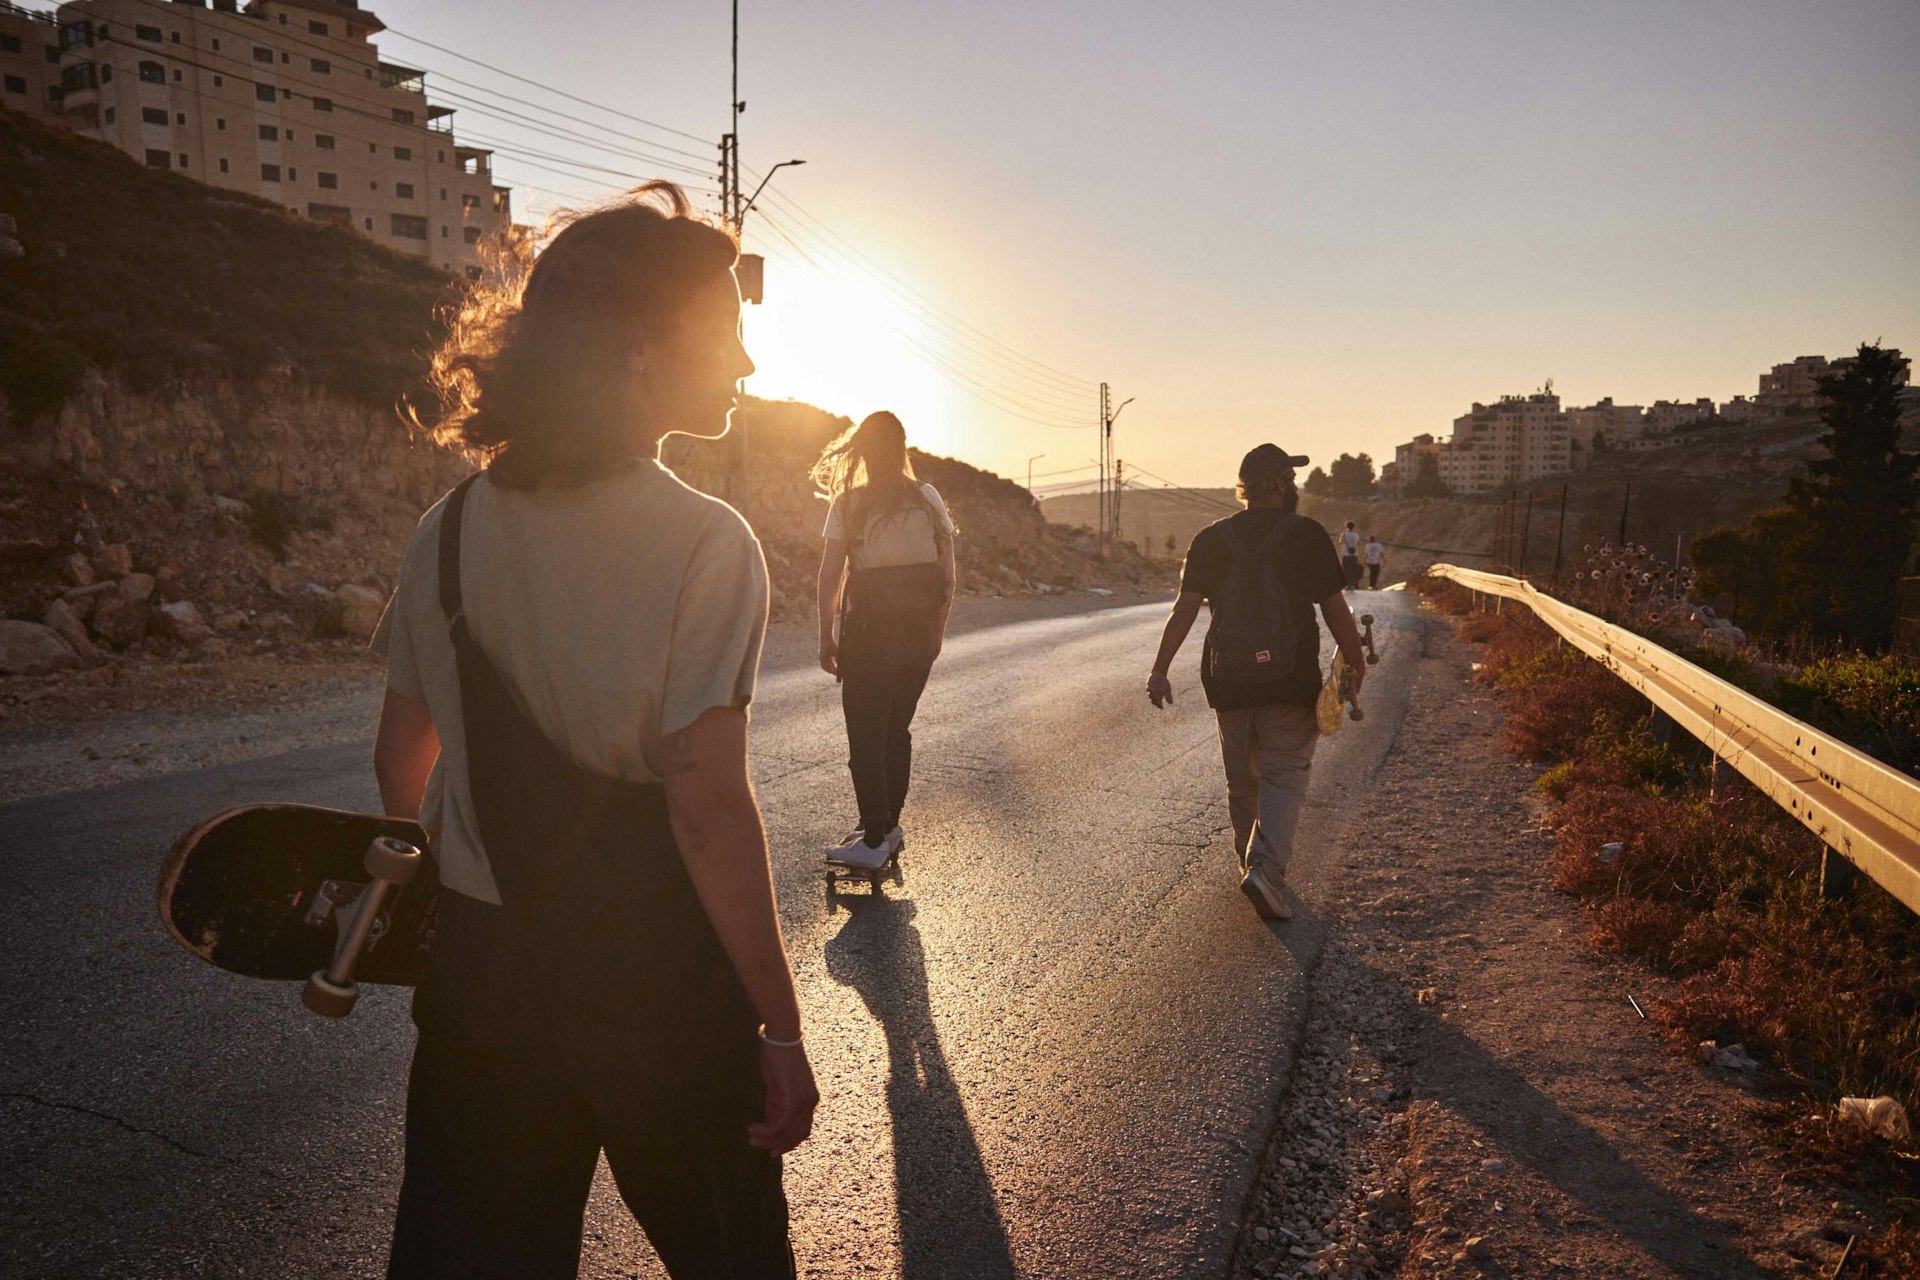 Meet the crew who introduced skateboarding to Palestine